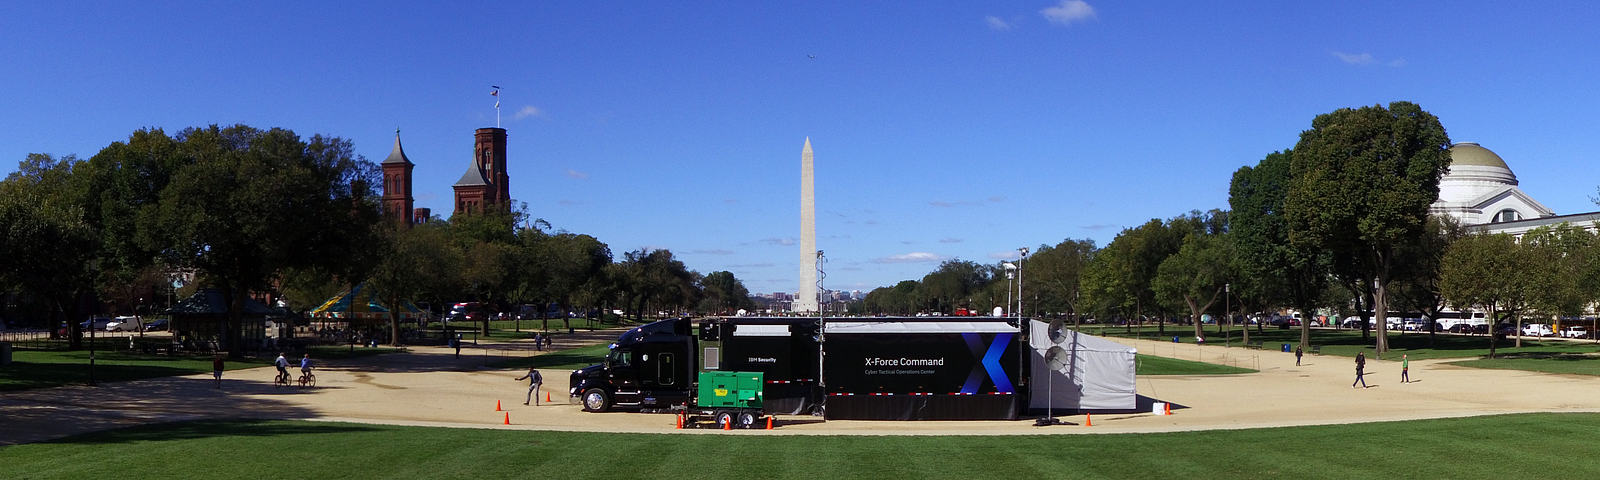 Black C-TOC truck at the national mall with the Washington Monument in the background